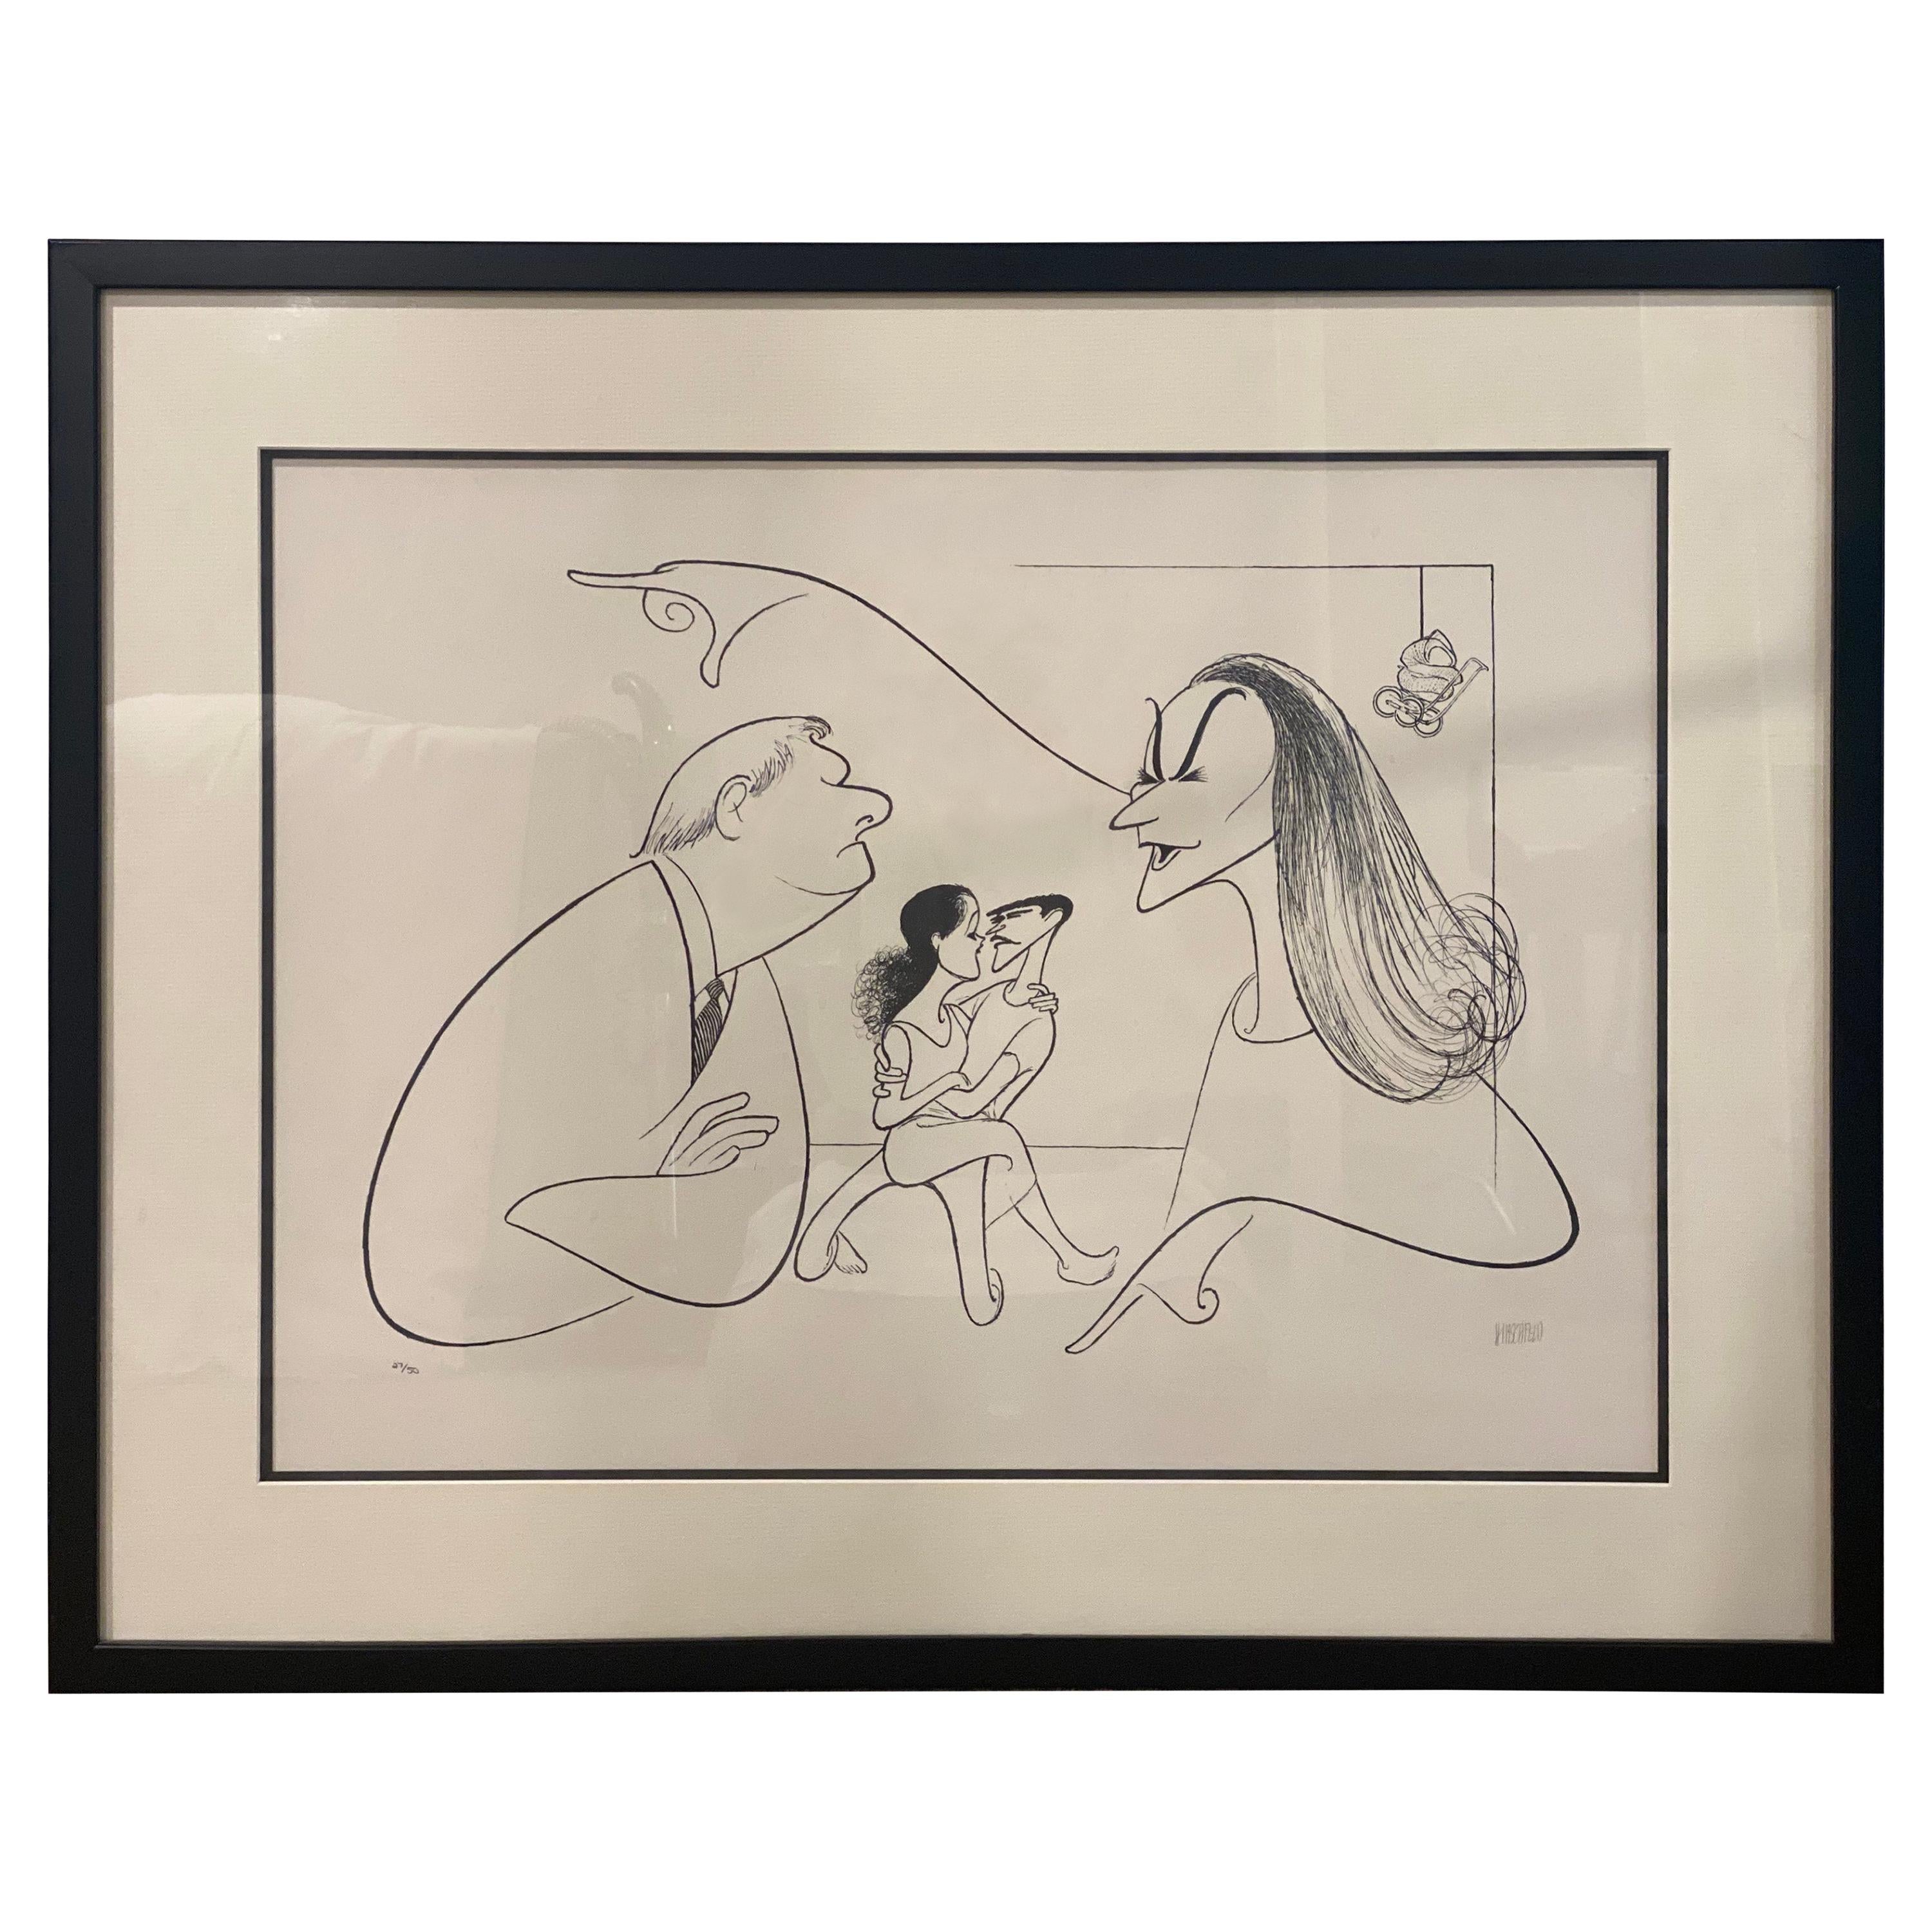 Albert Al Hirschfeld "The Play About the Baby", Signed Print